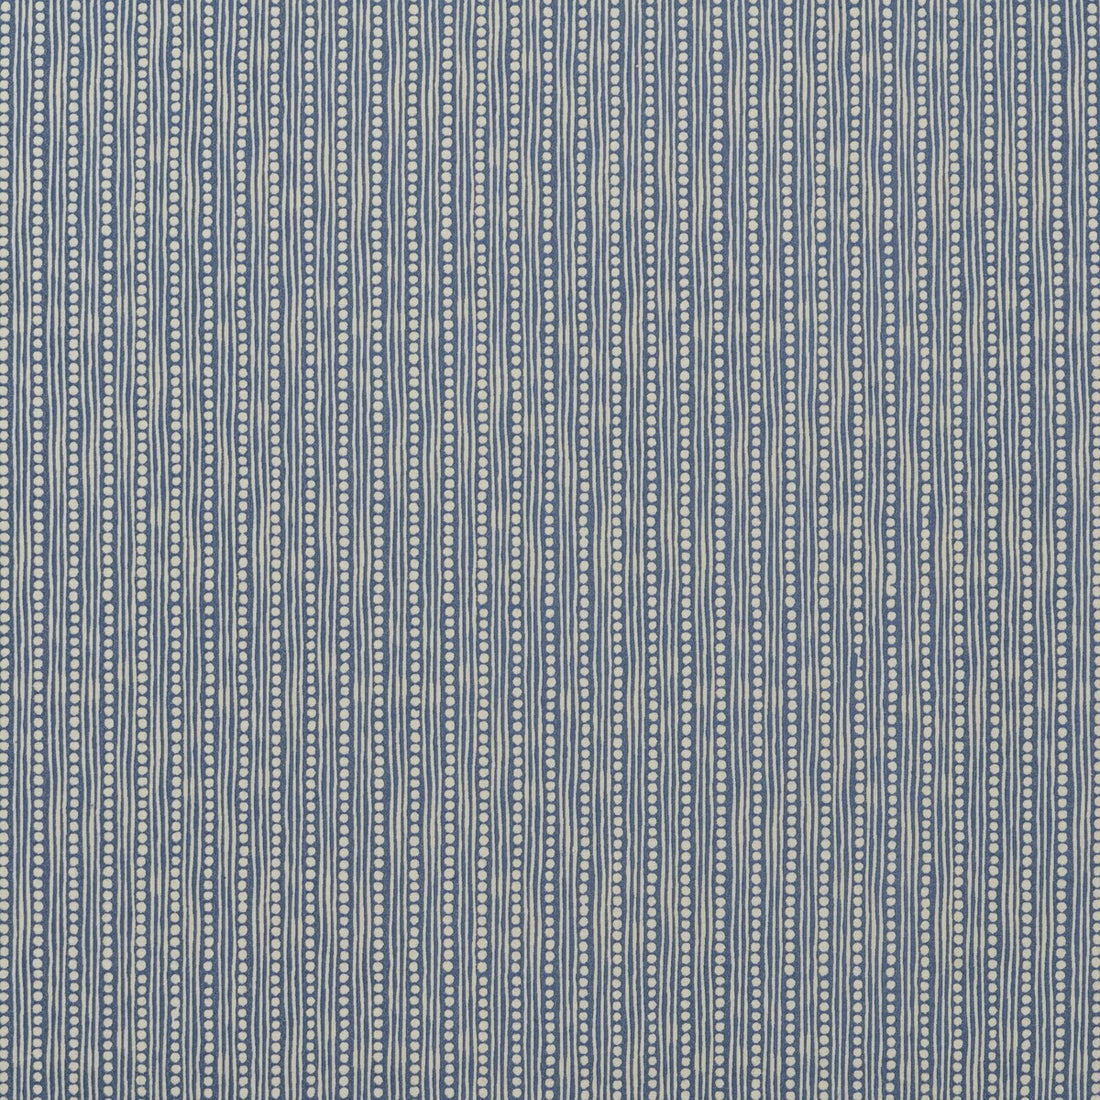 Wickham fabric in blue color - pattern BFC-3678.5.0 - by Lee Jofa in the Blithfield collection